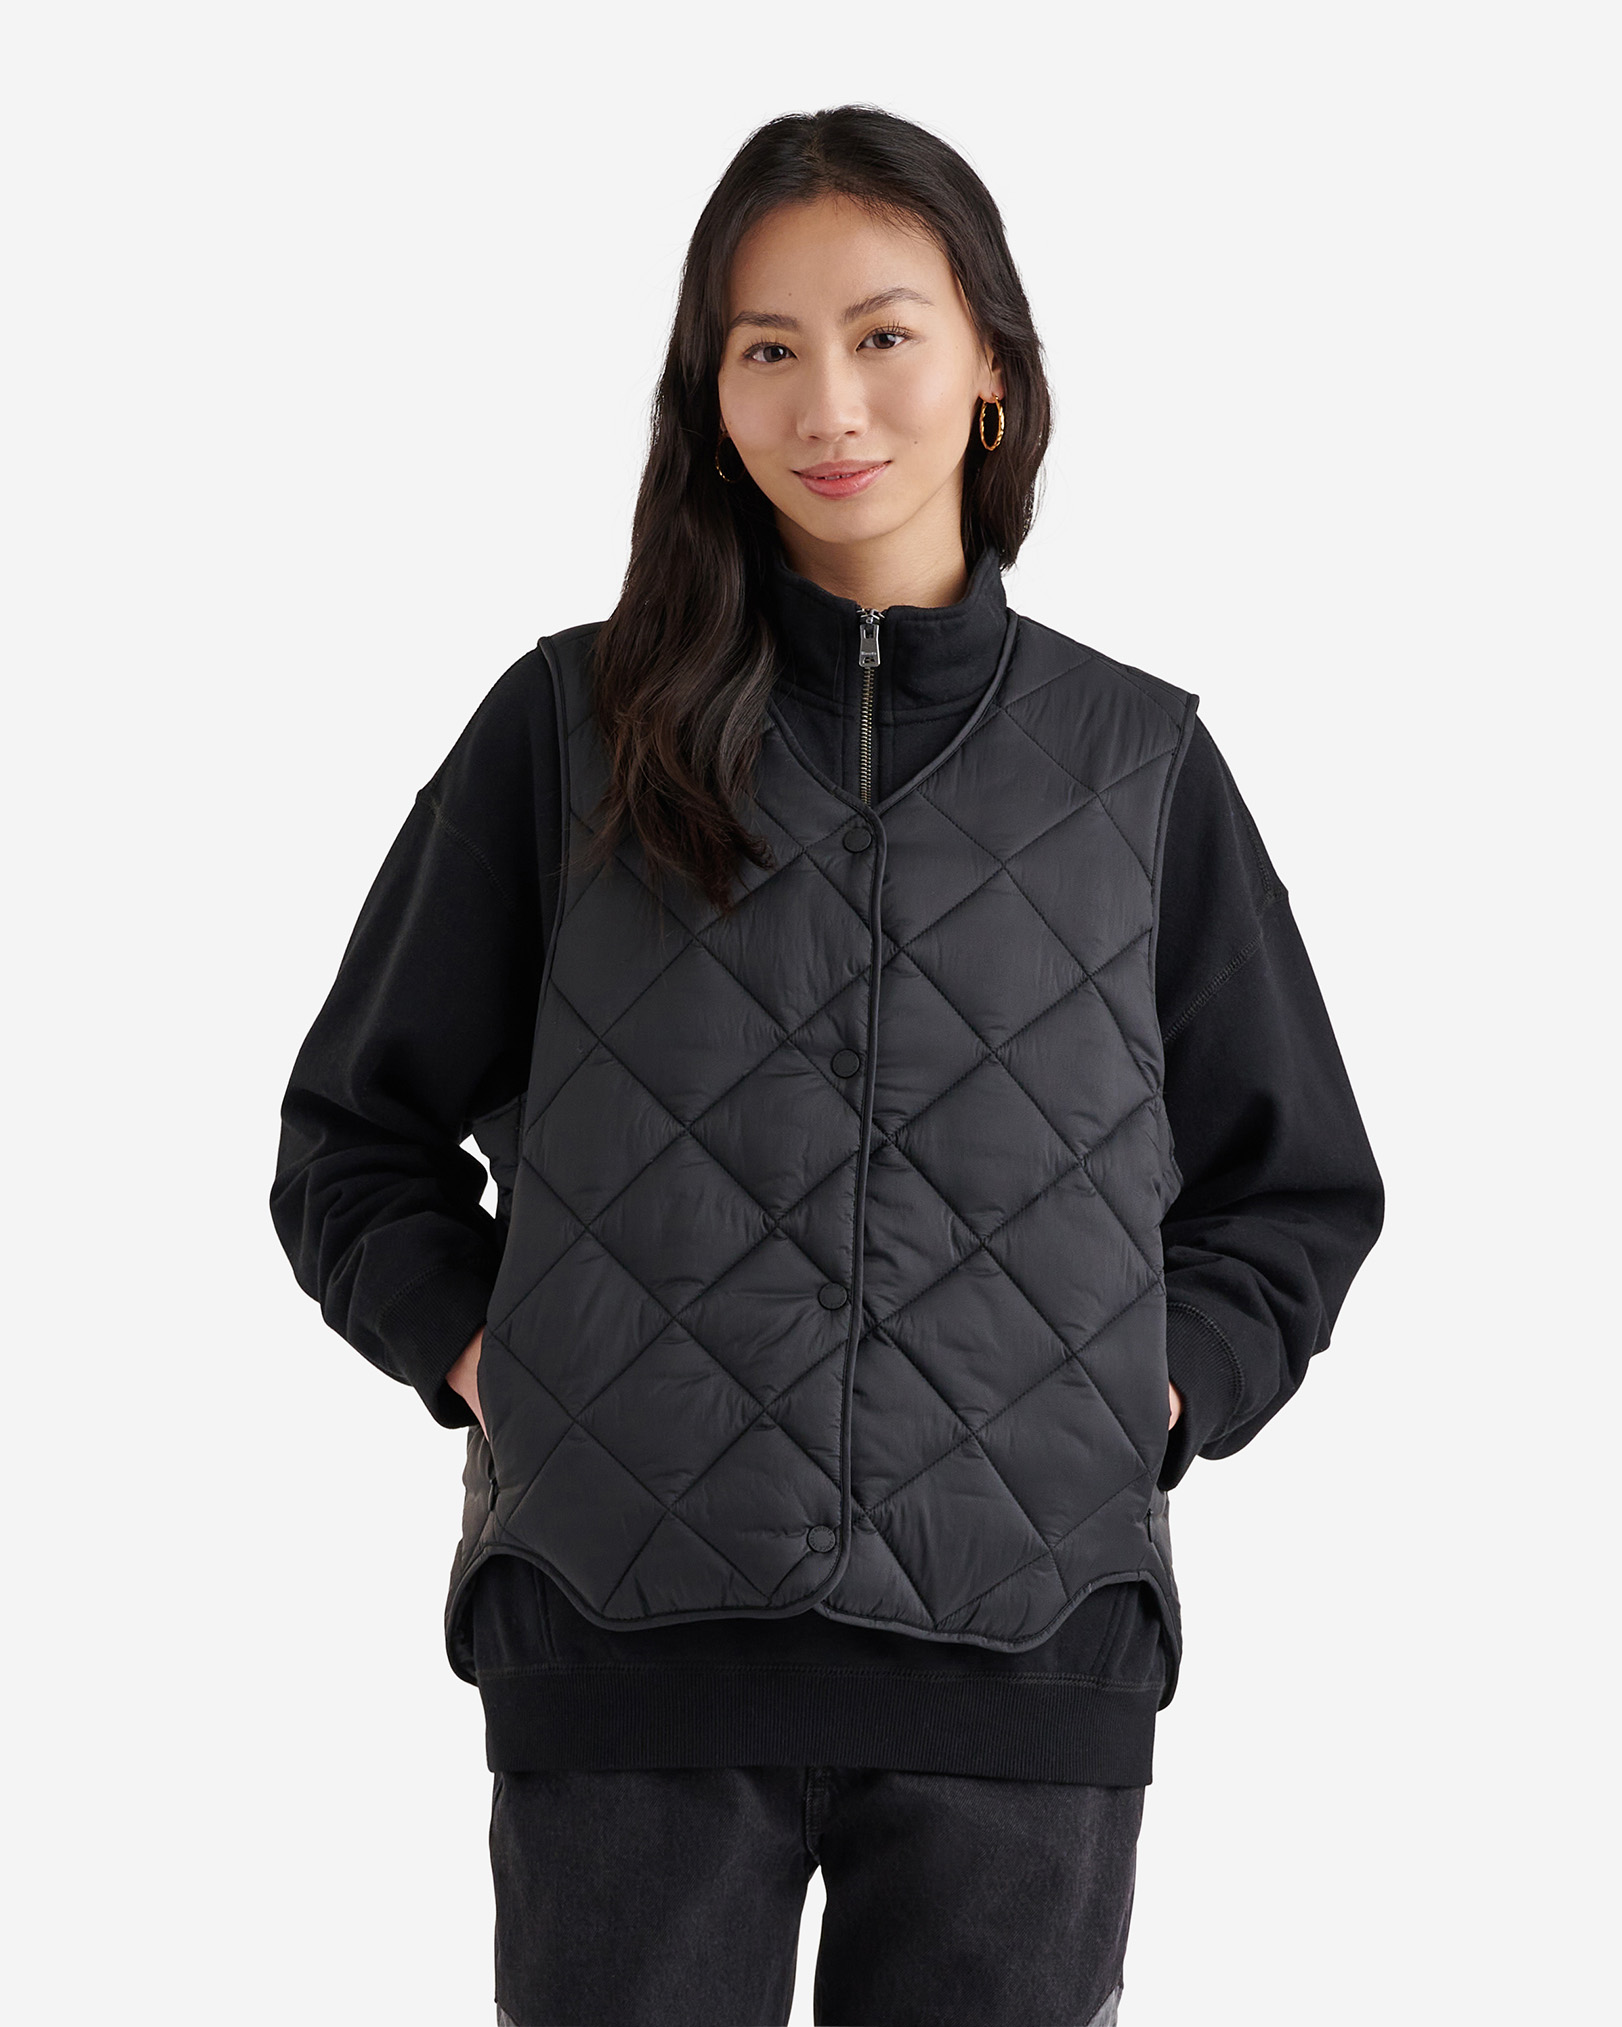 Roots Melville Quilted Vest in Black